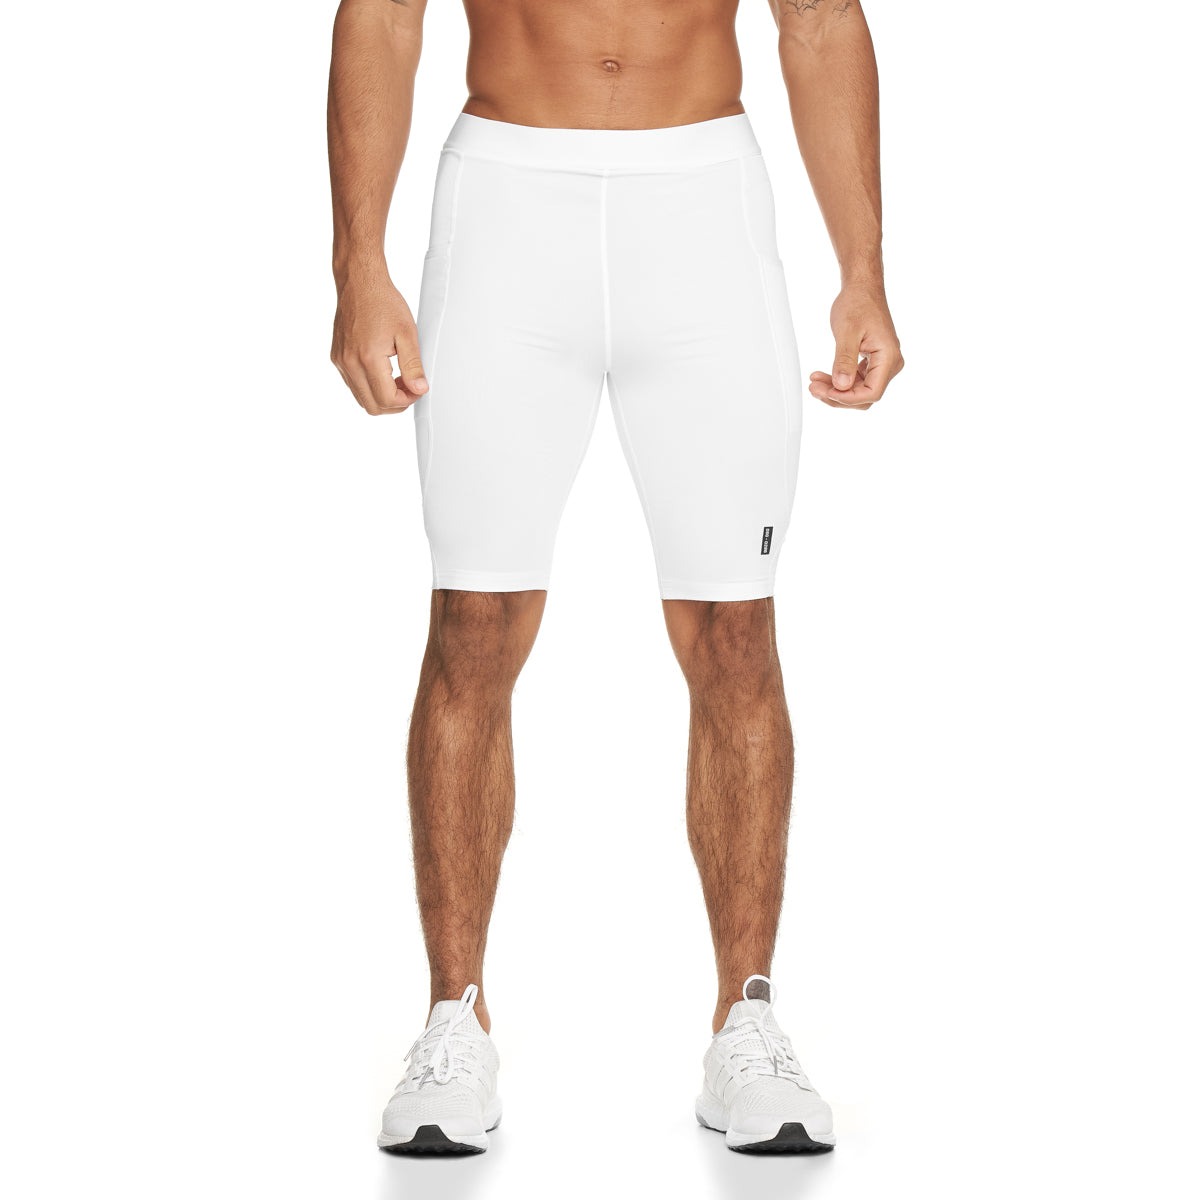 15 Amazing White Compression Shorts For 2023